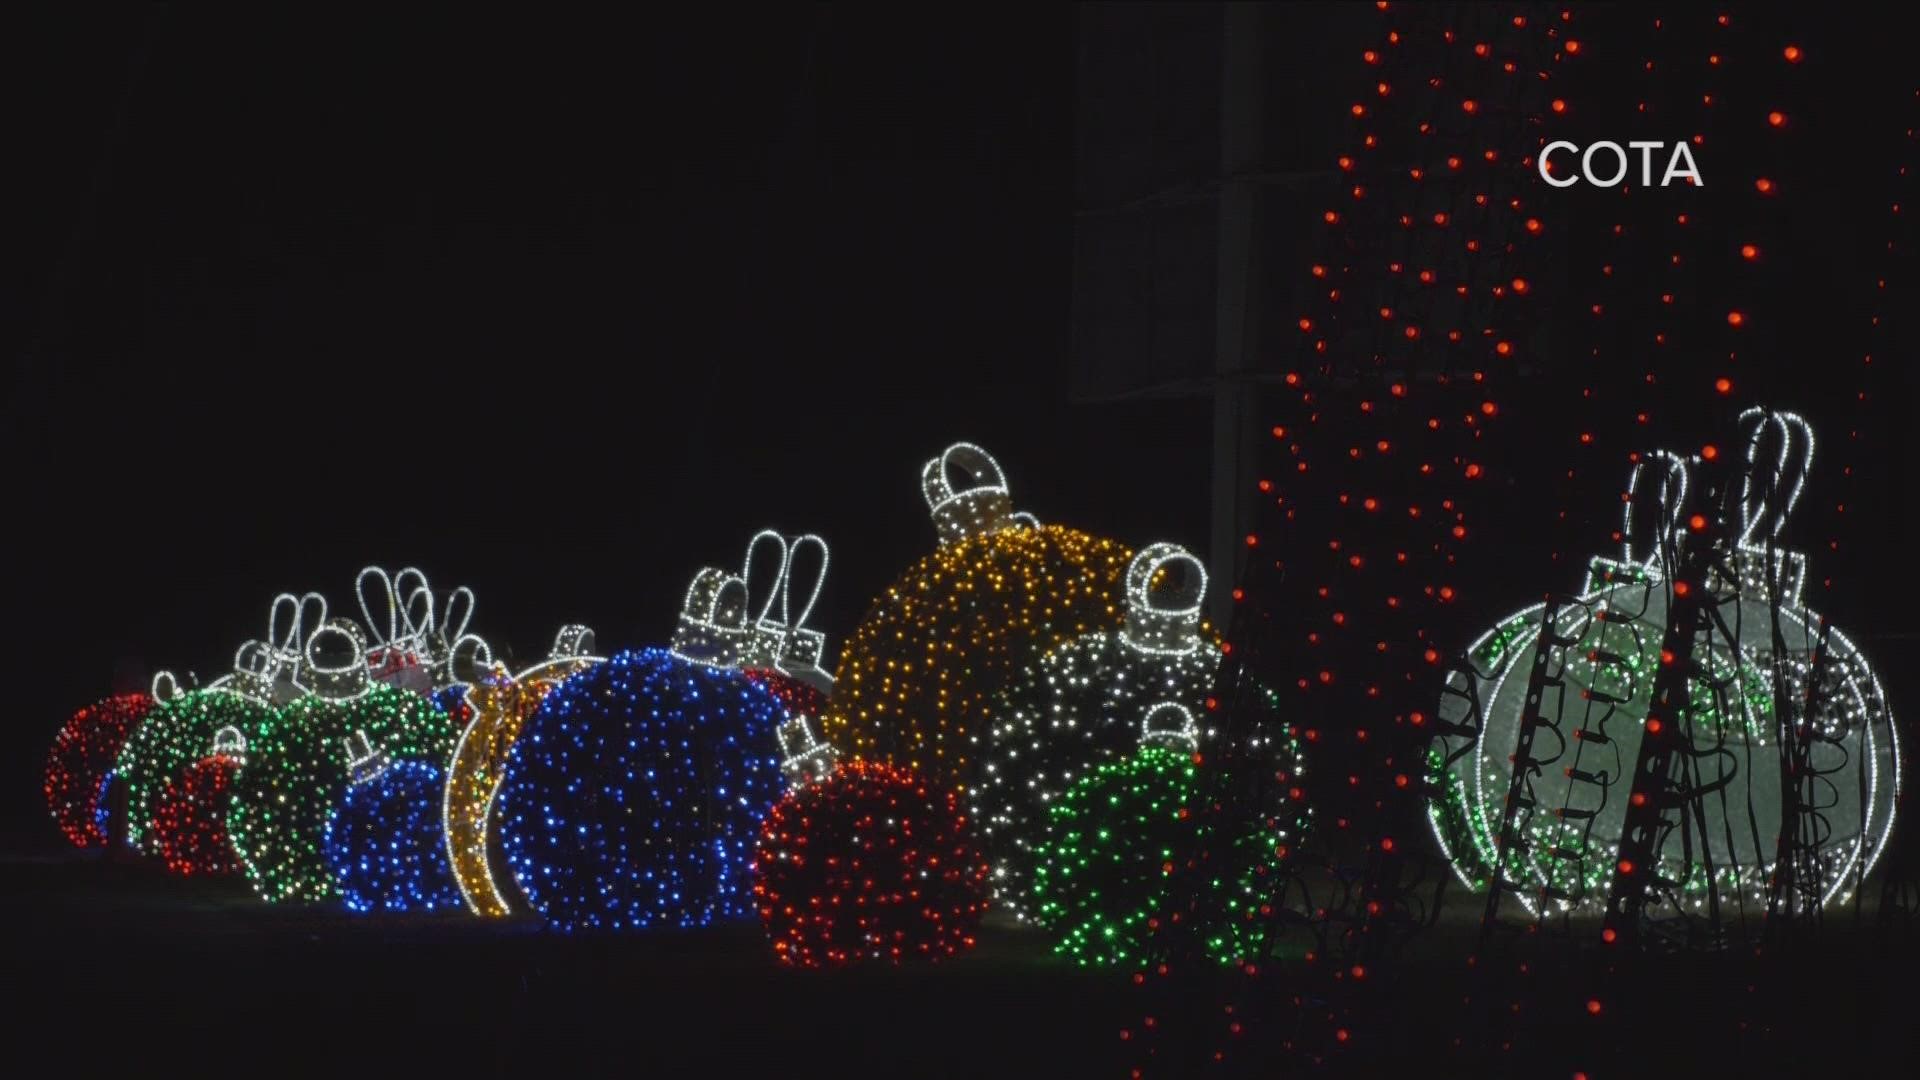 Peppermint Parkway, the one-mile long drive-thru display of lights all throughout the COTA track, returns for the third year in a row to bring holiday joy.